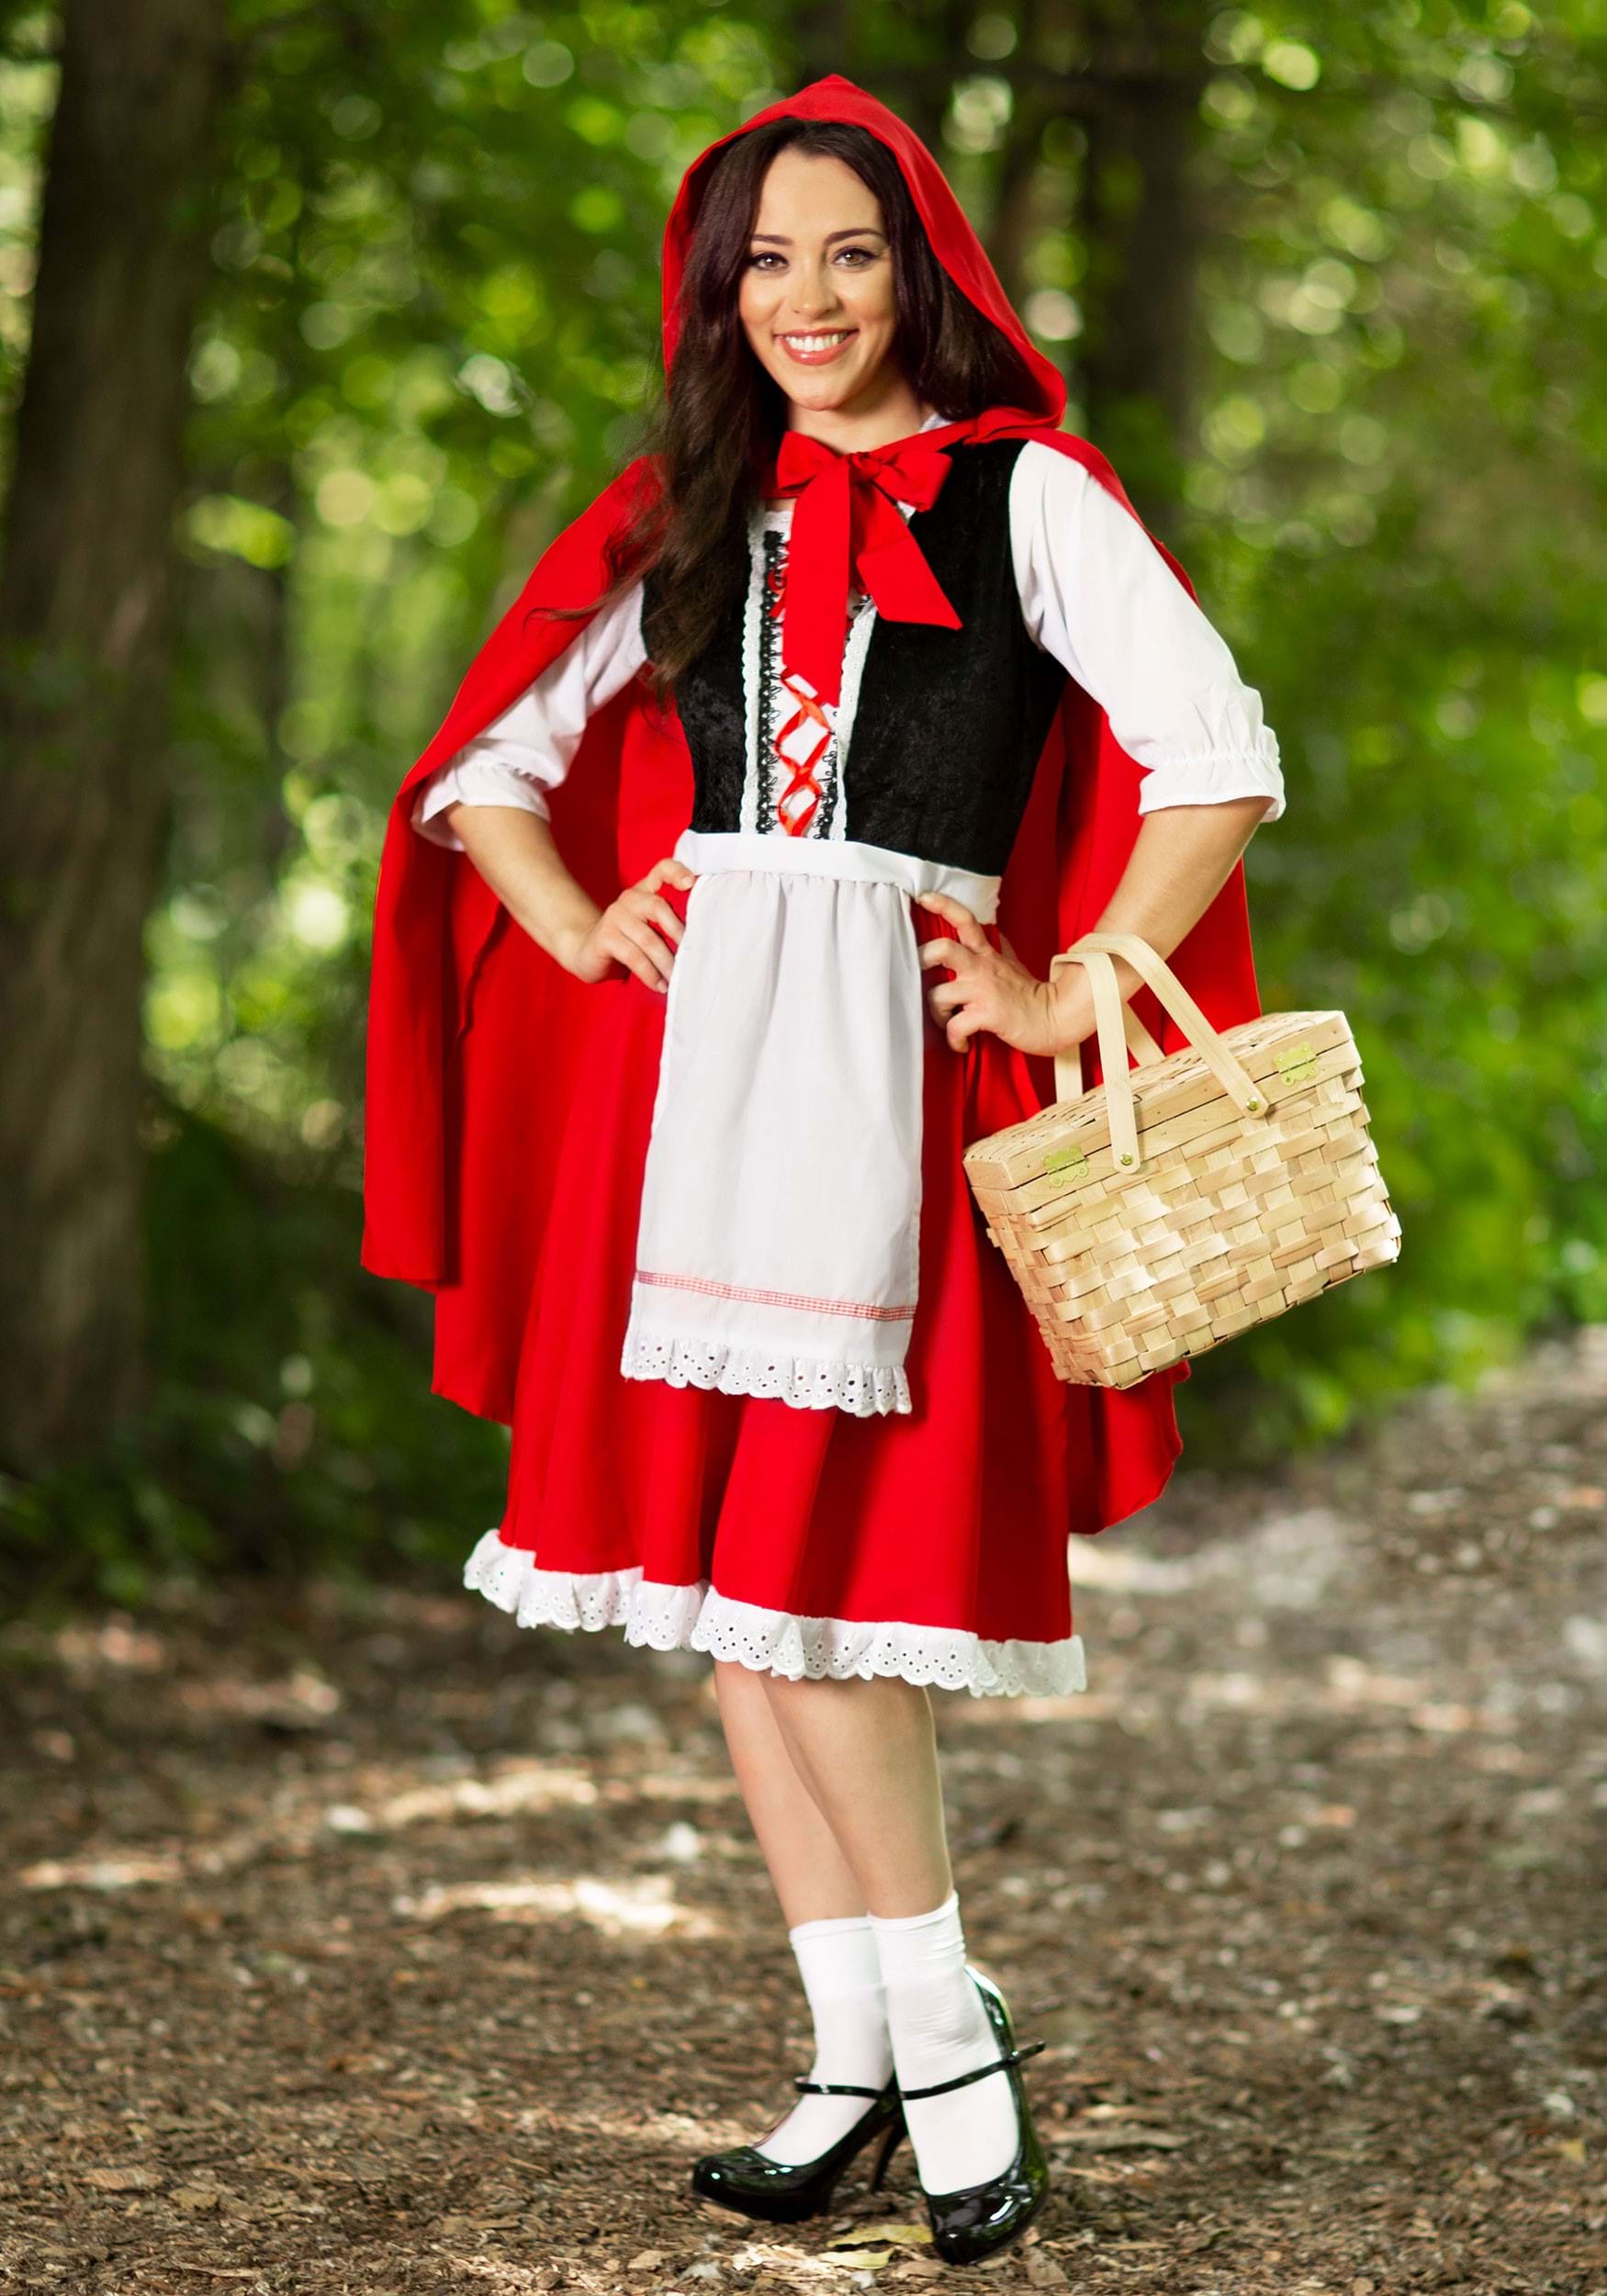 Little Red Riding Hood Adult Costume